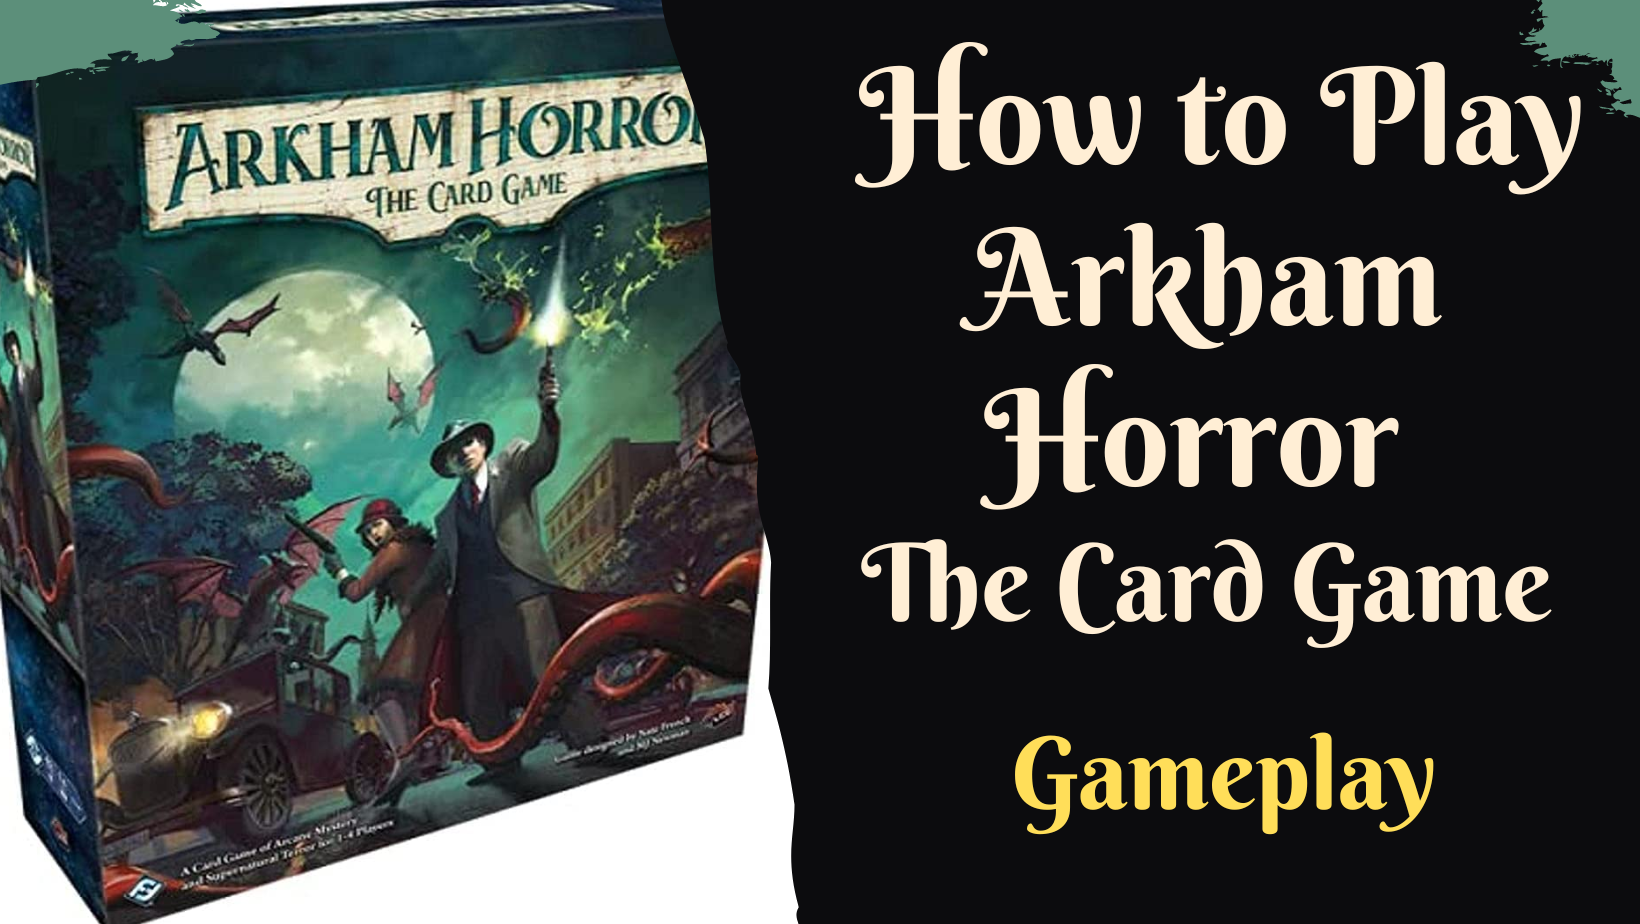 How to play Arkham Horror Card Game Gameplay